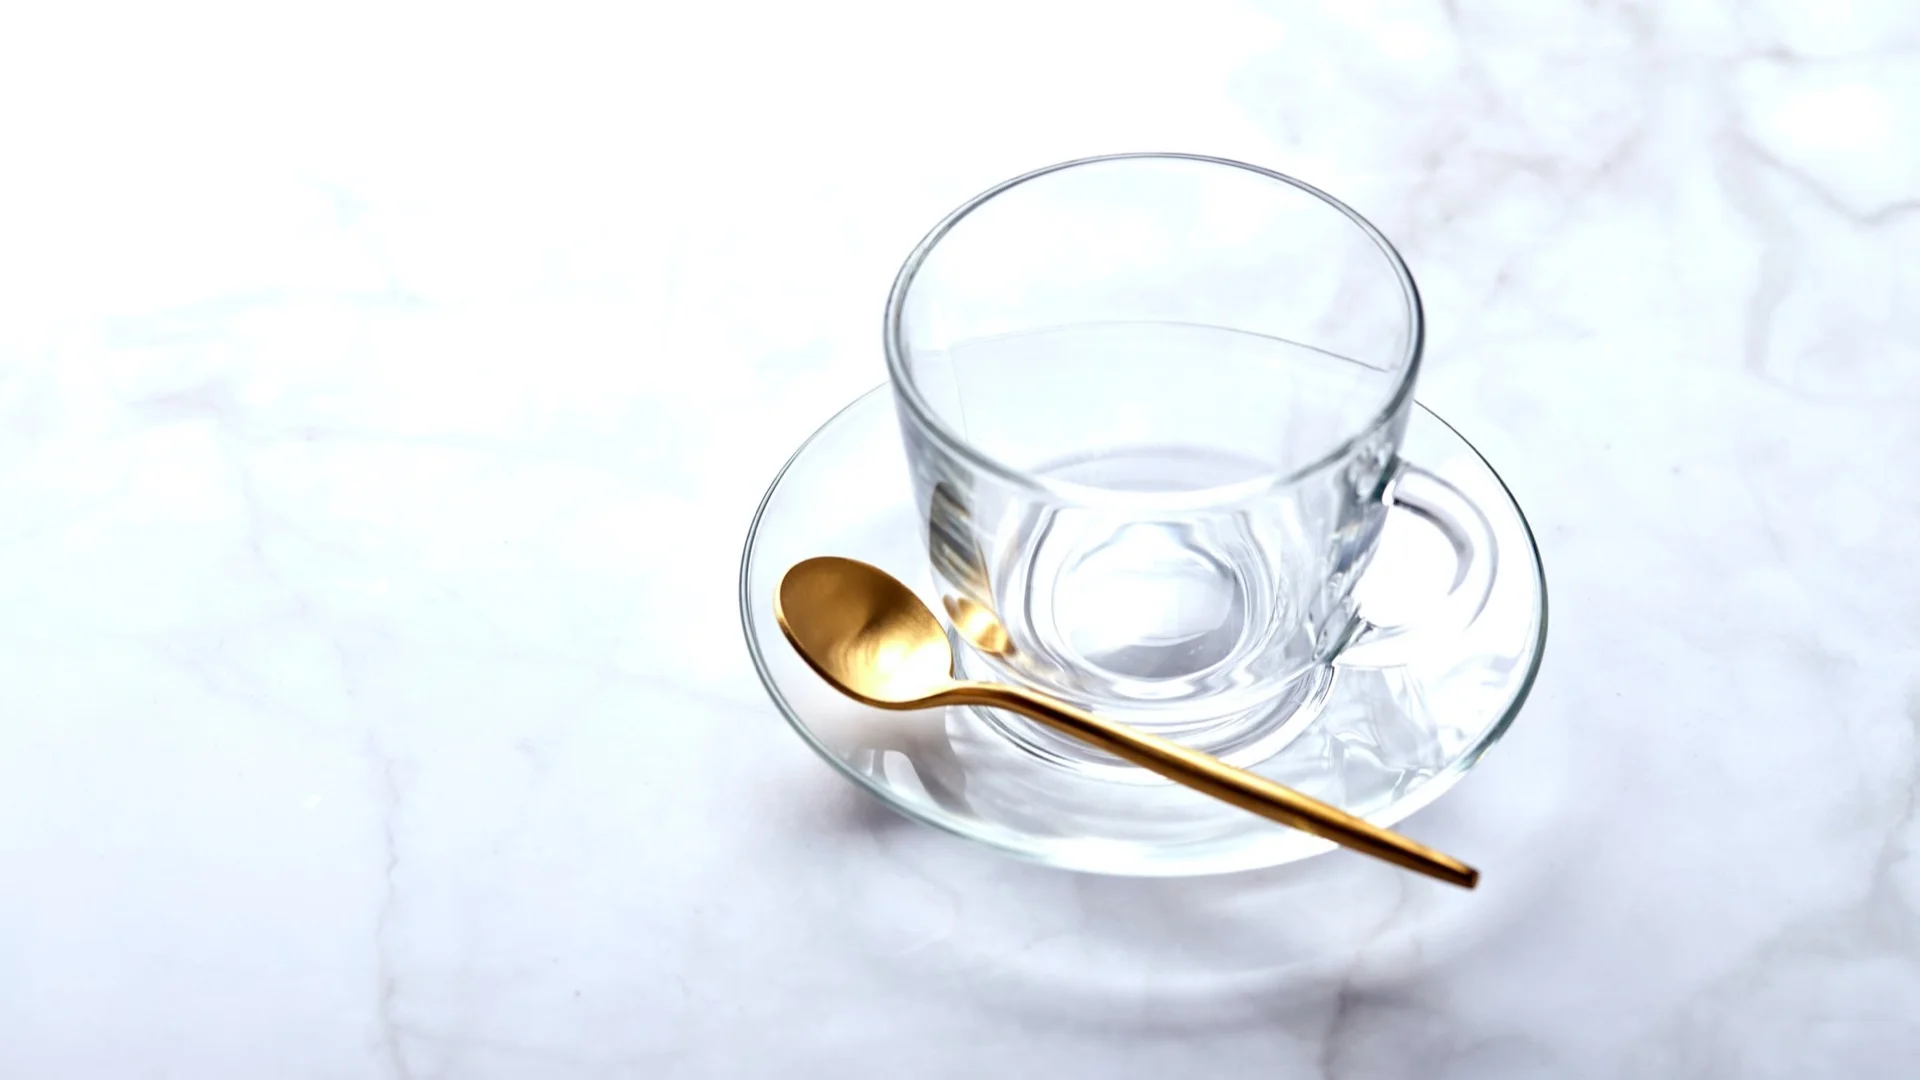 Employing Teaspoons: What is Half of 3/4 Cup?